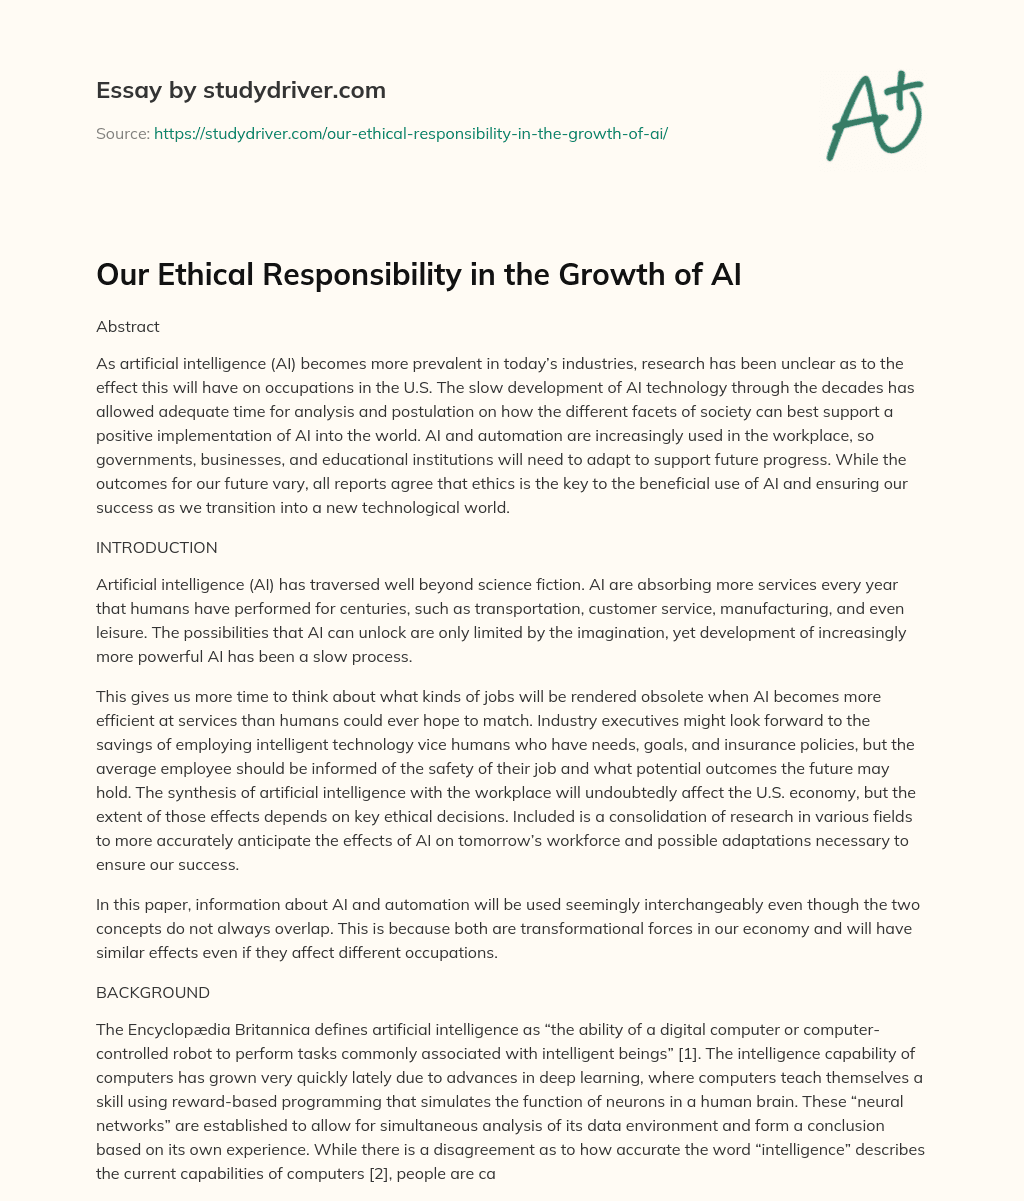 Our Ethical Responsibility in the Growth of AI essay